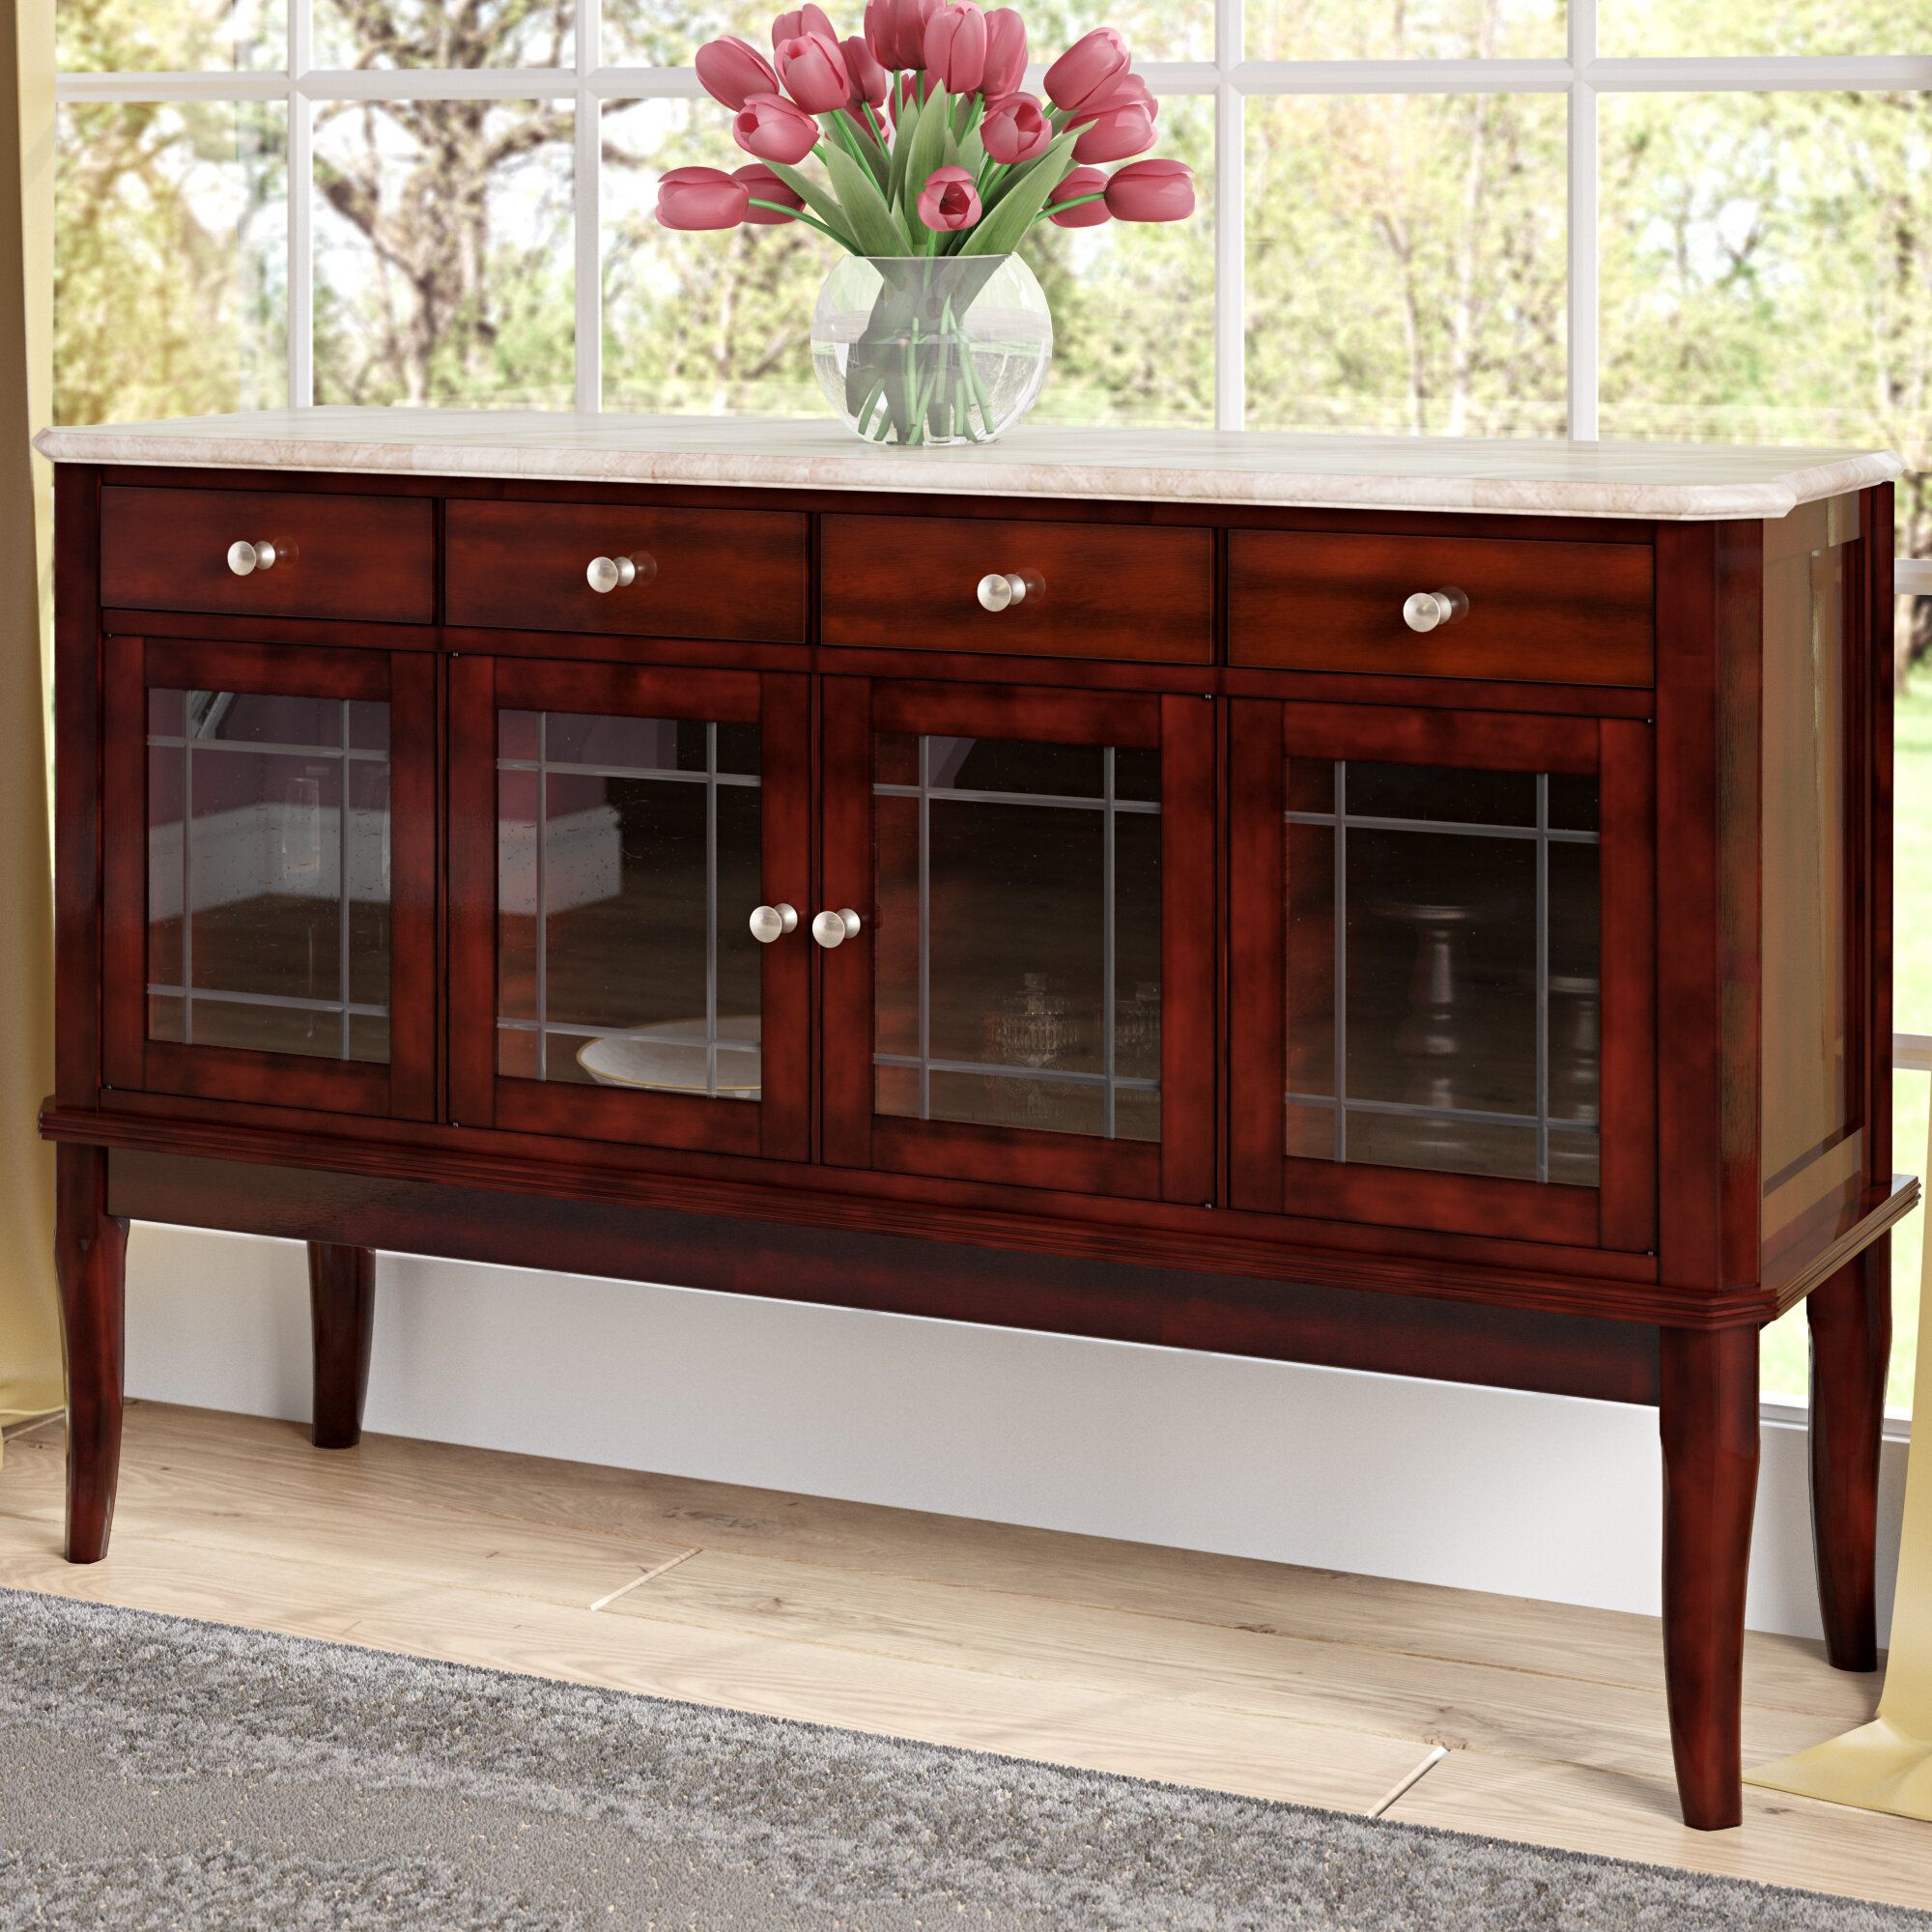 Cabinet Equipped Marble & Granite Sideboards & Buffets You Regarding Shoreland Sideboards (View 19 of 30)